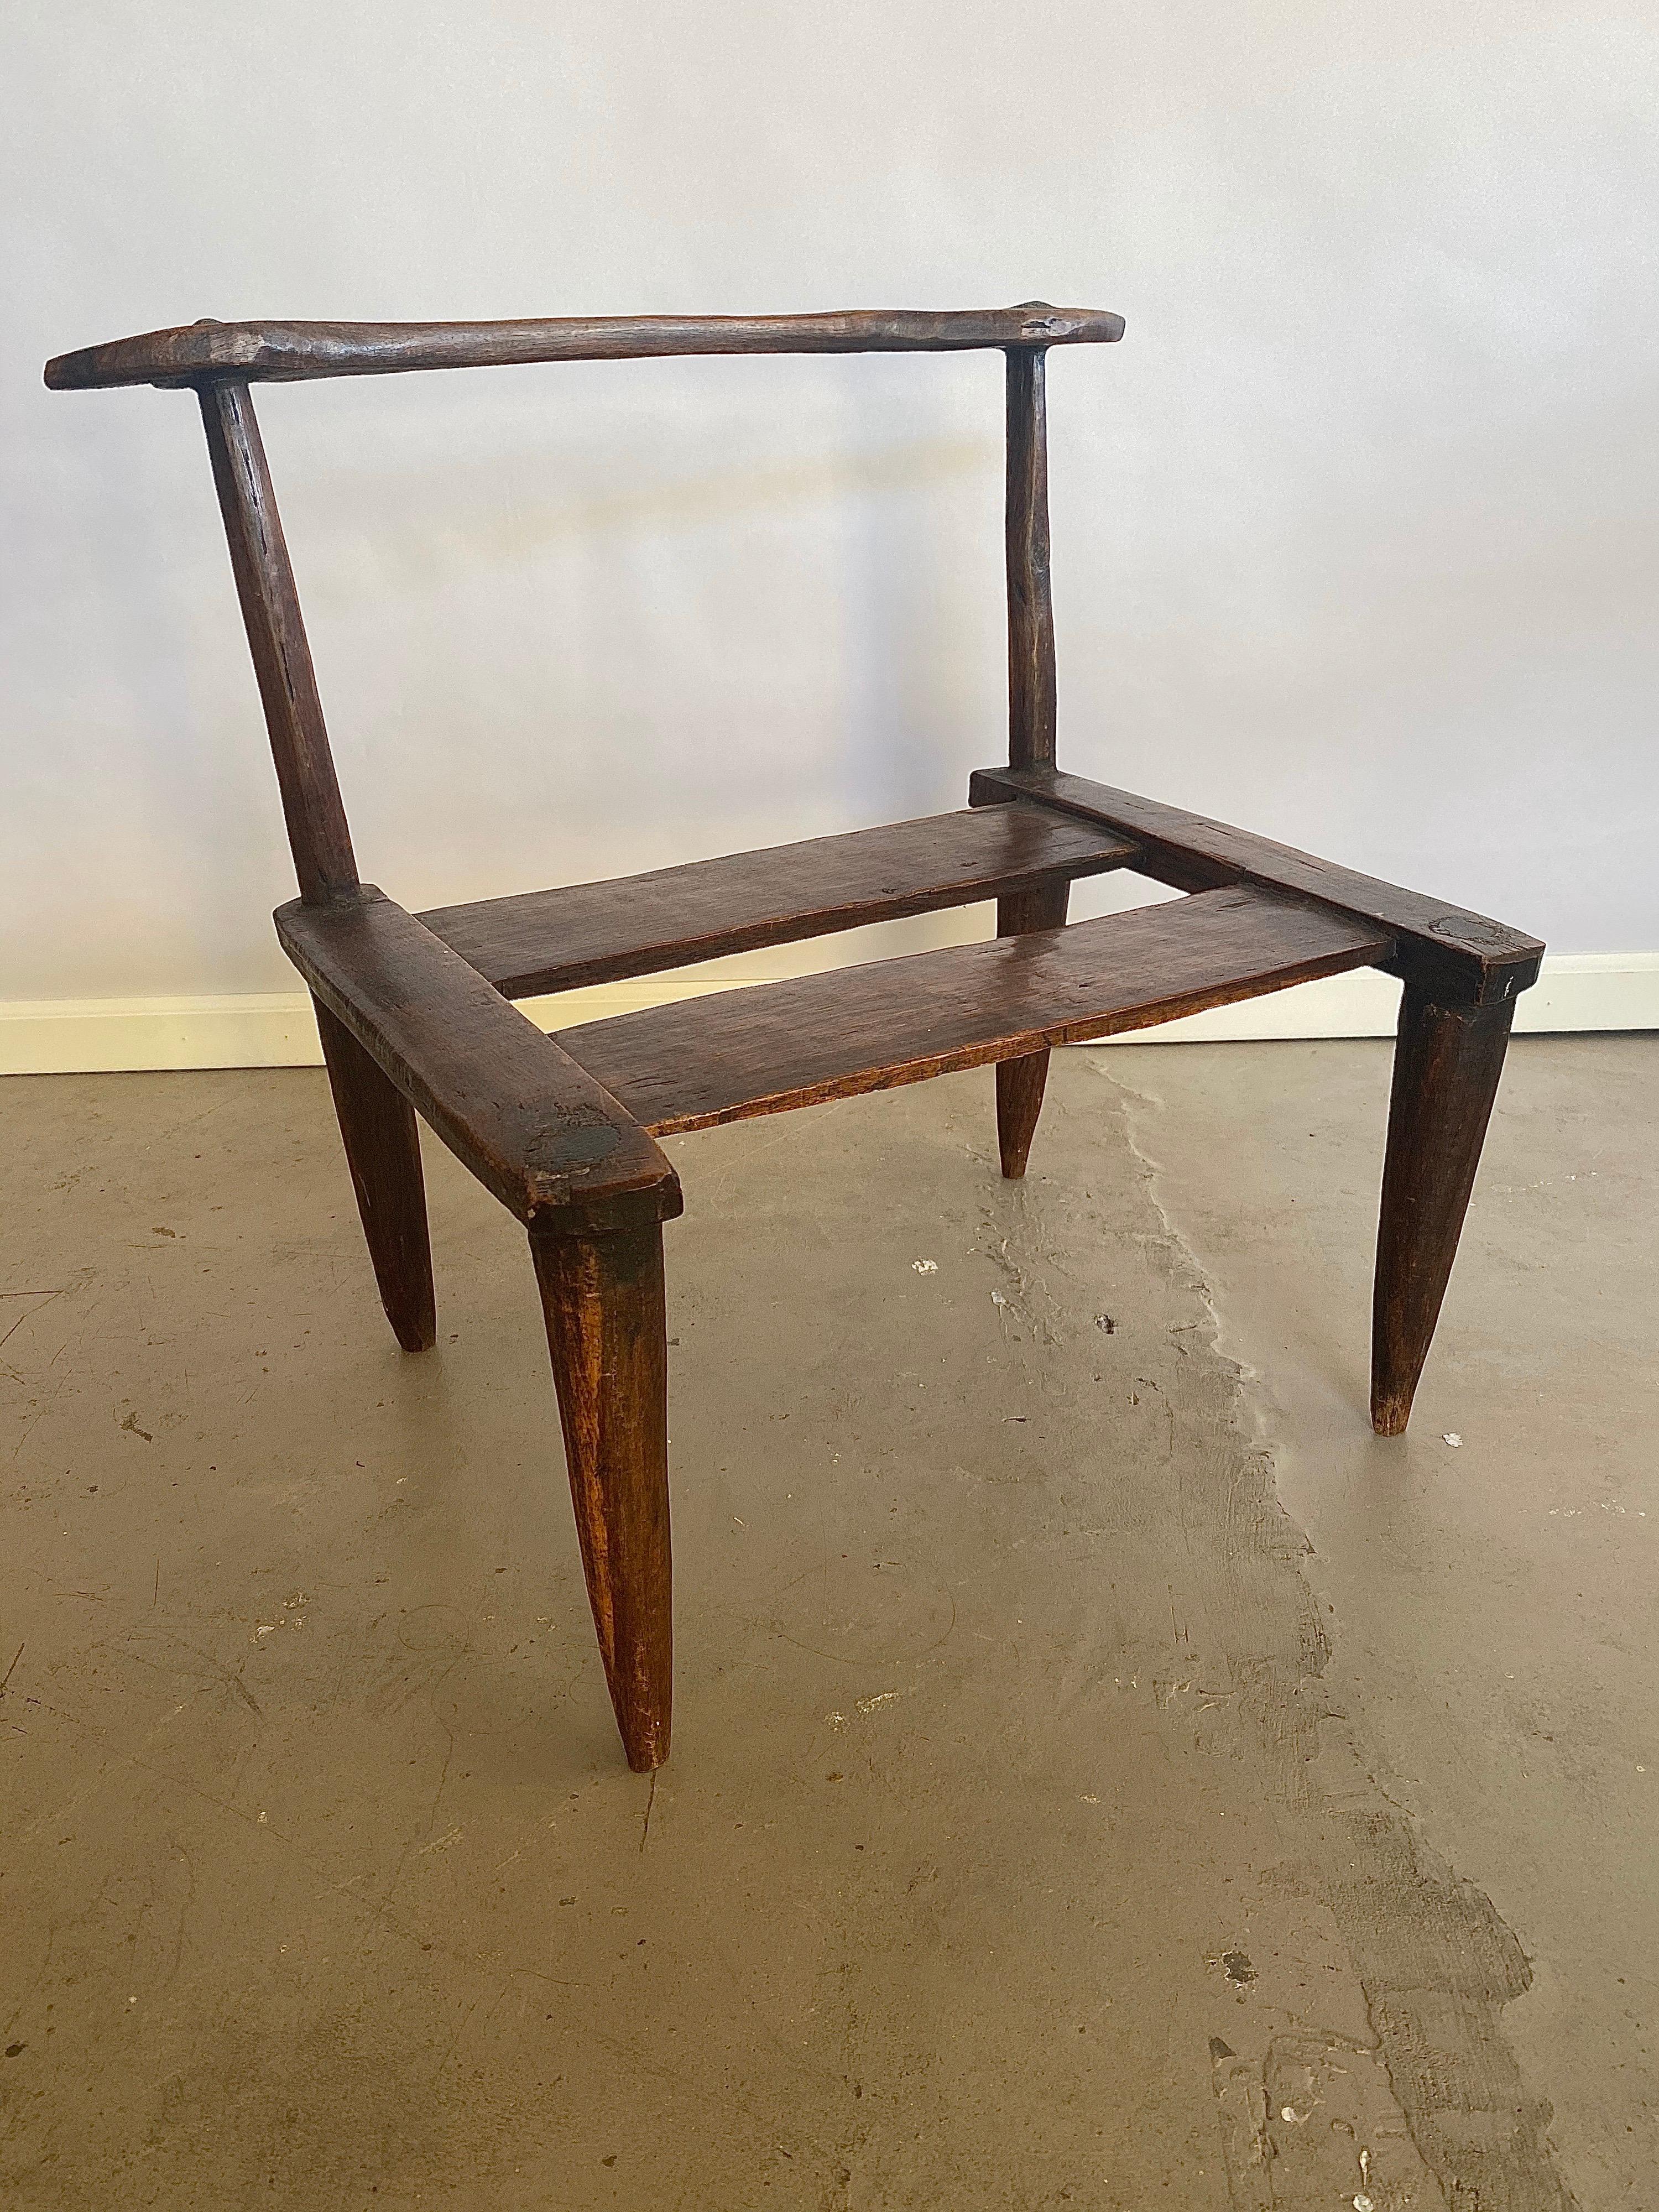 Beautifully master-crafted and highly decorative dark wood low side chair or stool. This piece is made in a very organic natural way without the use of any iron nails, only wood-in-wood joints. It has several  features -like the crescent-moon shaped